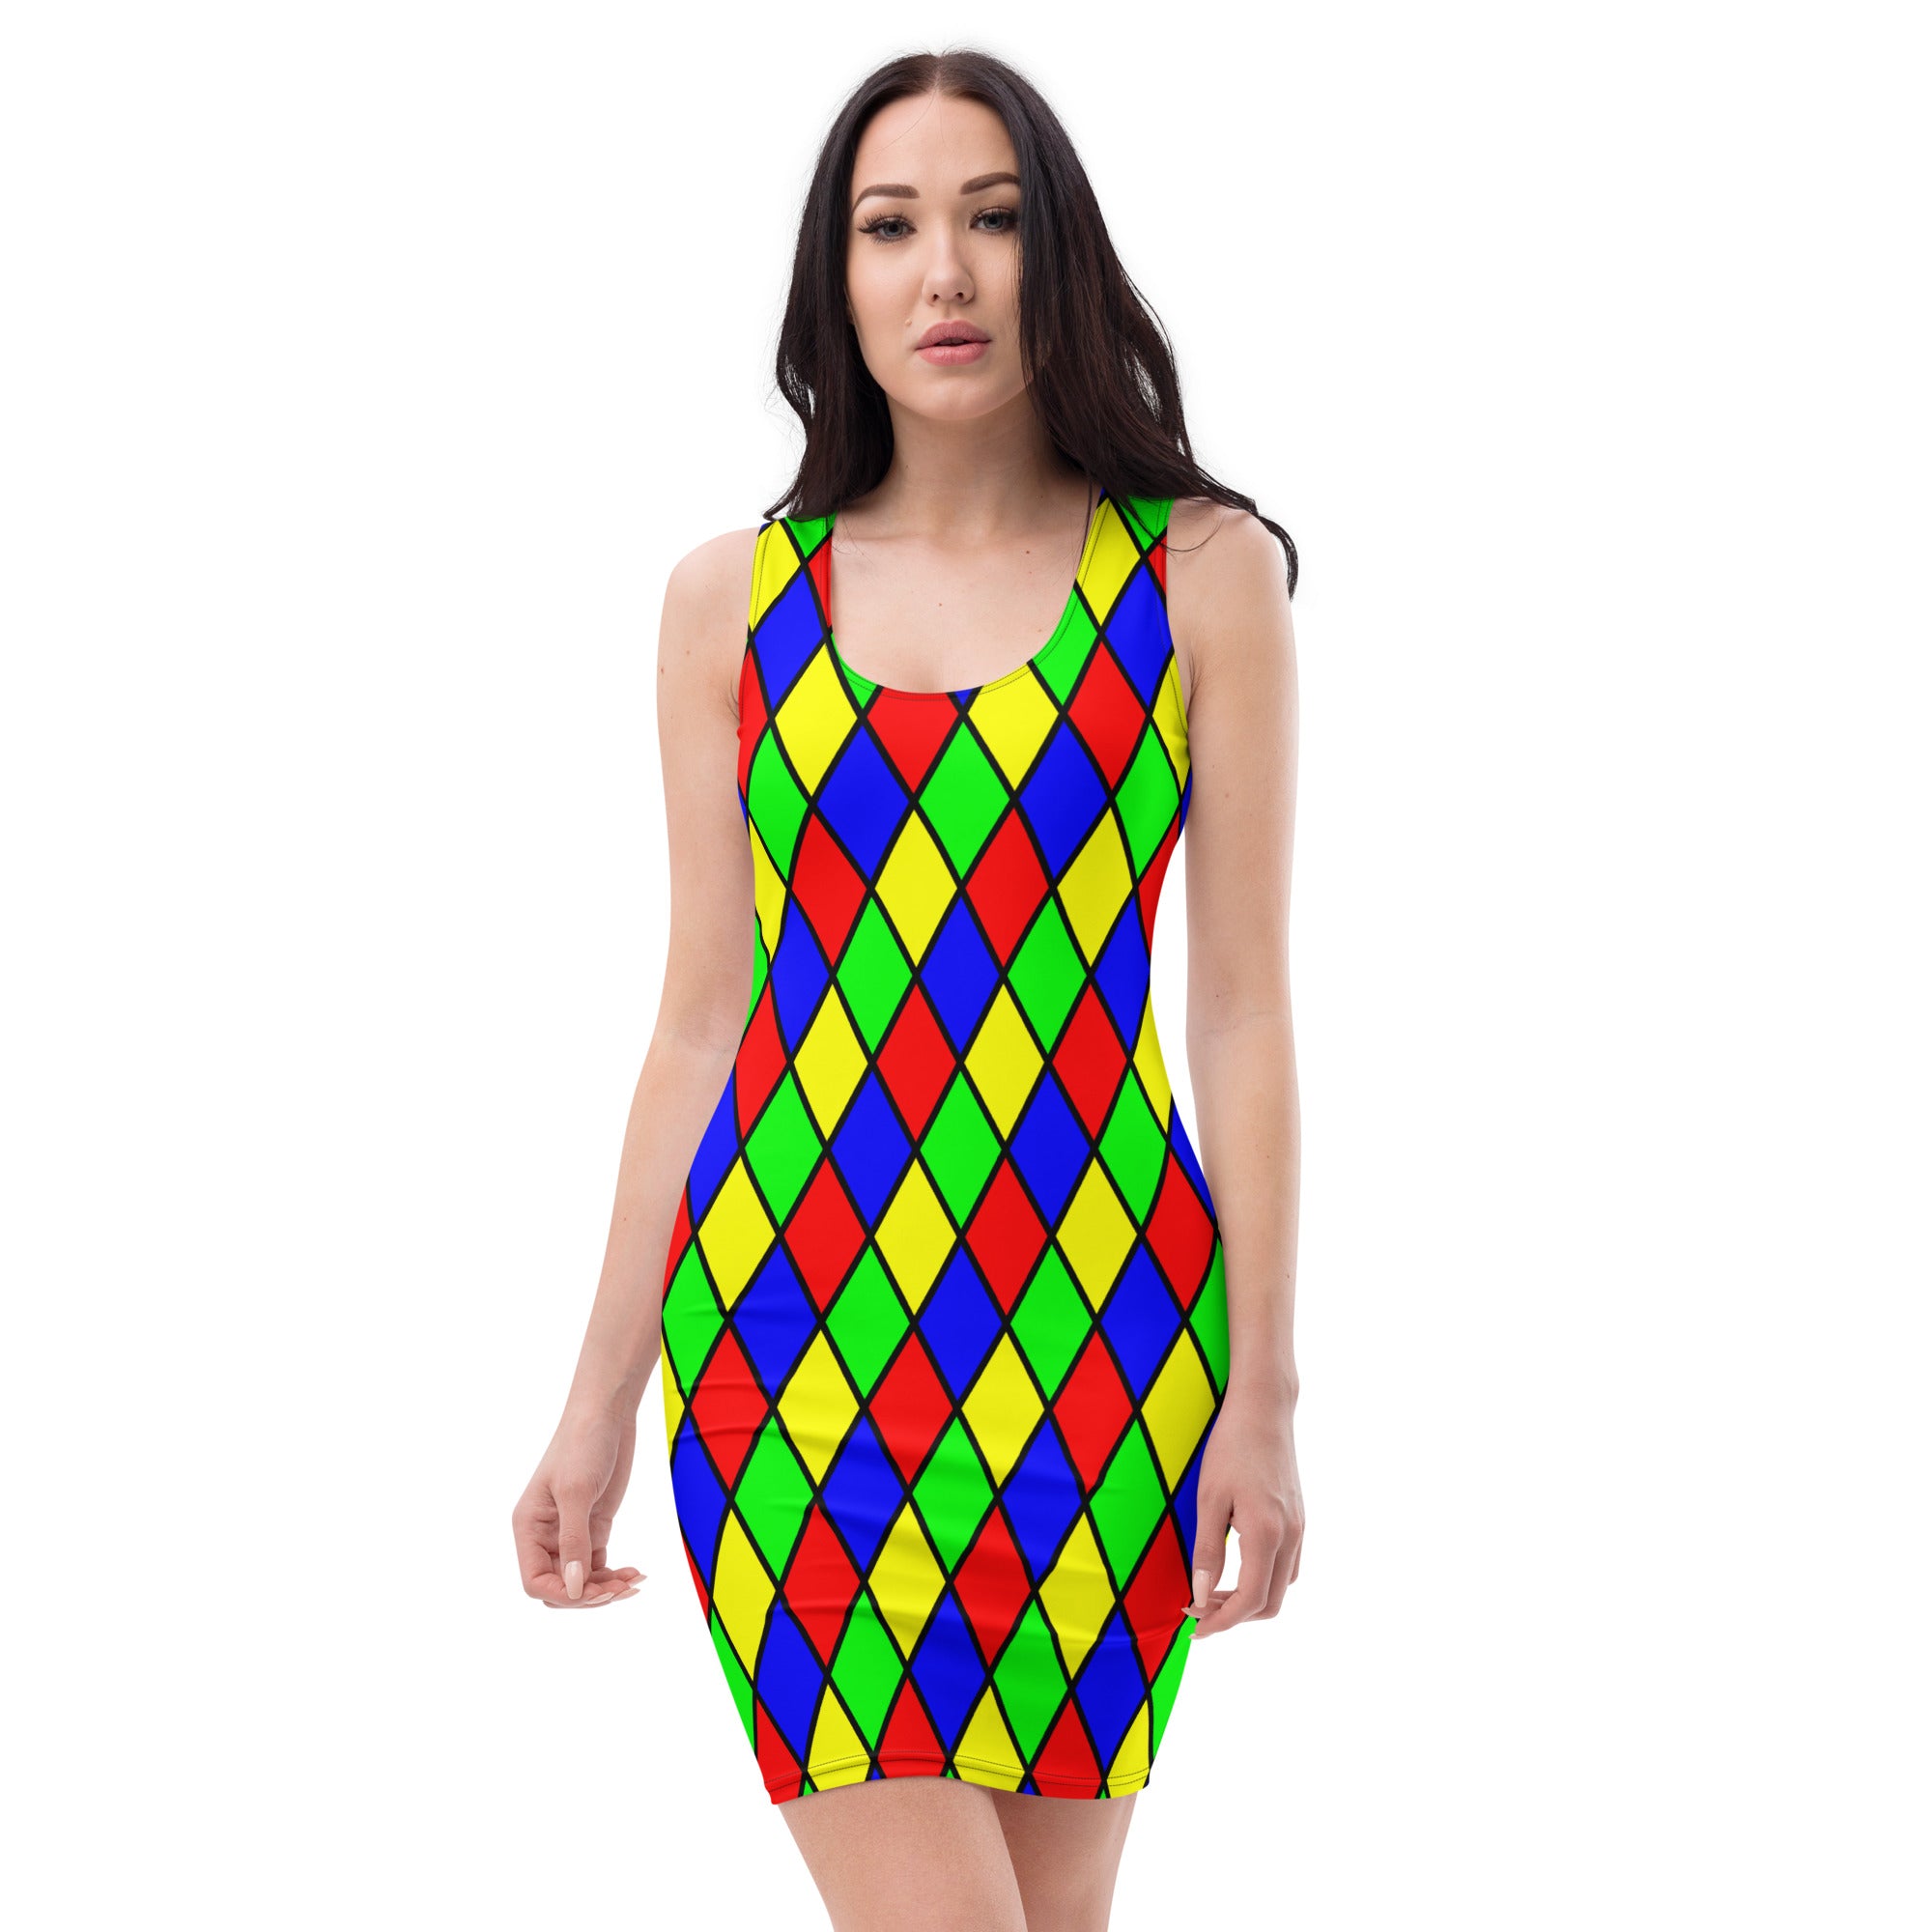 fitted dress with a blue, yellow and green stained glass design